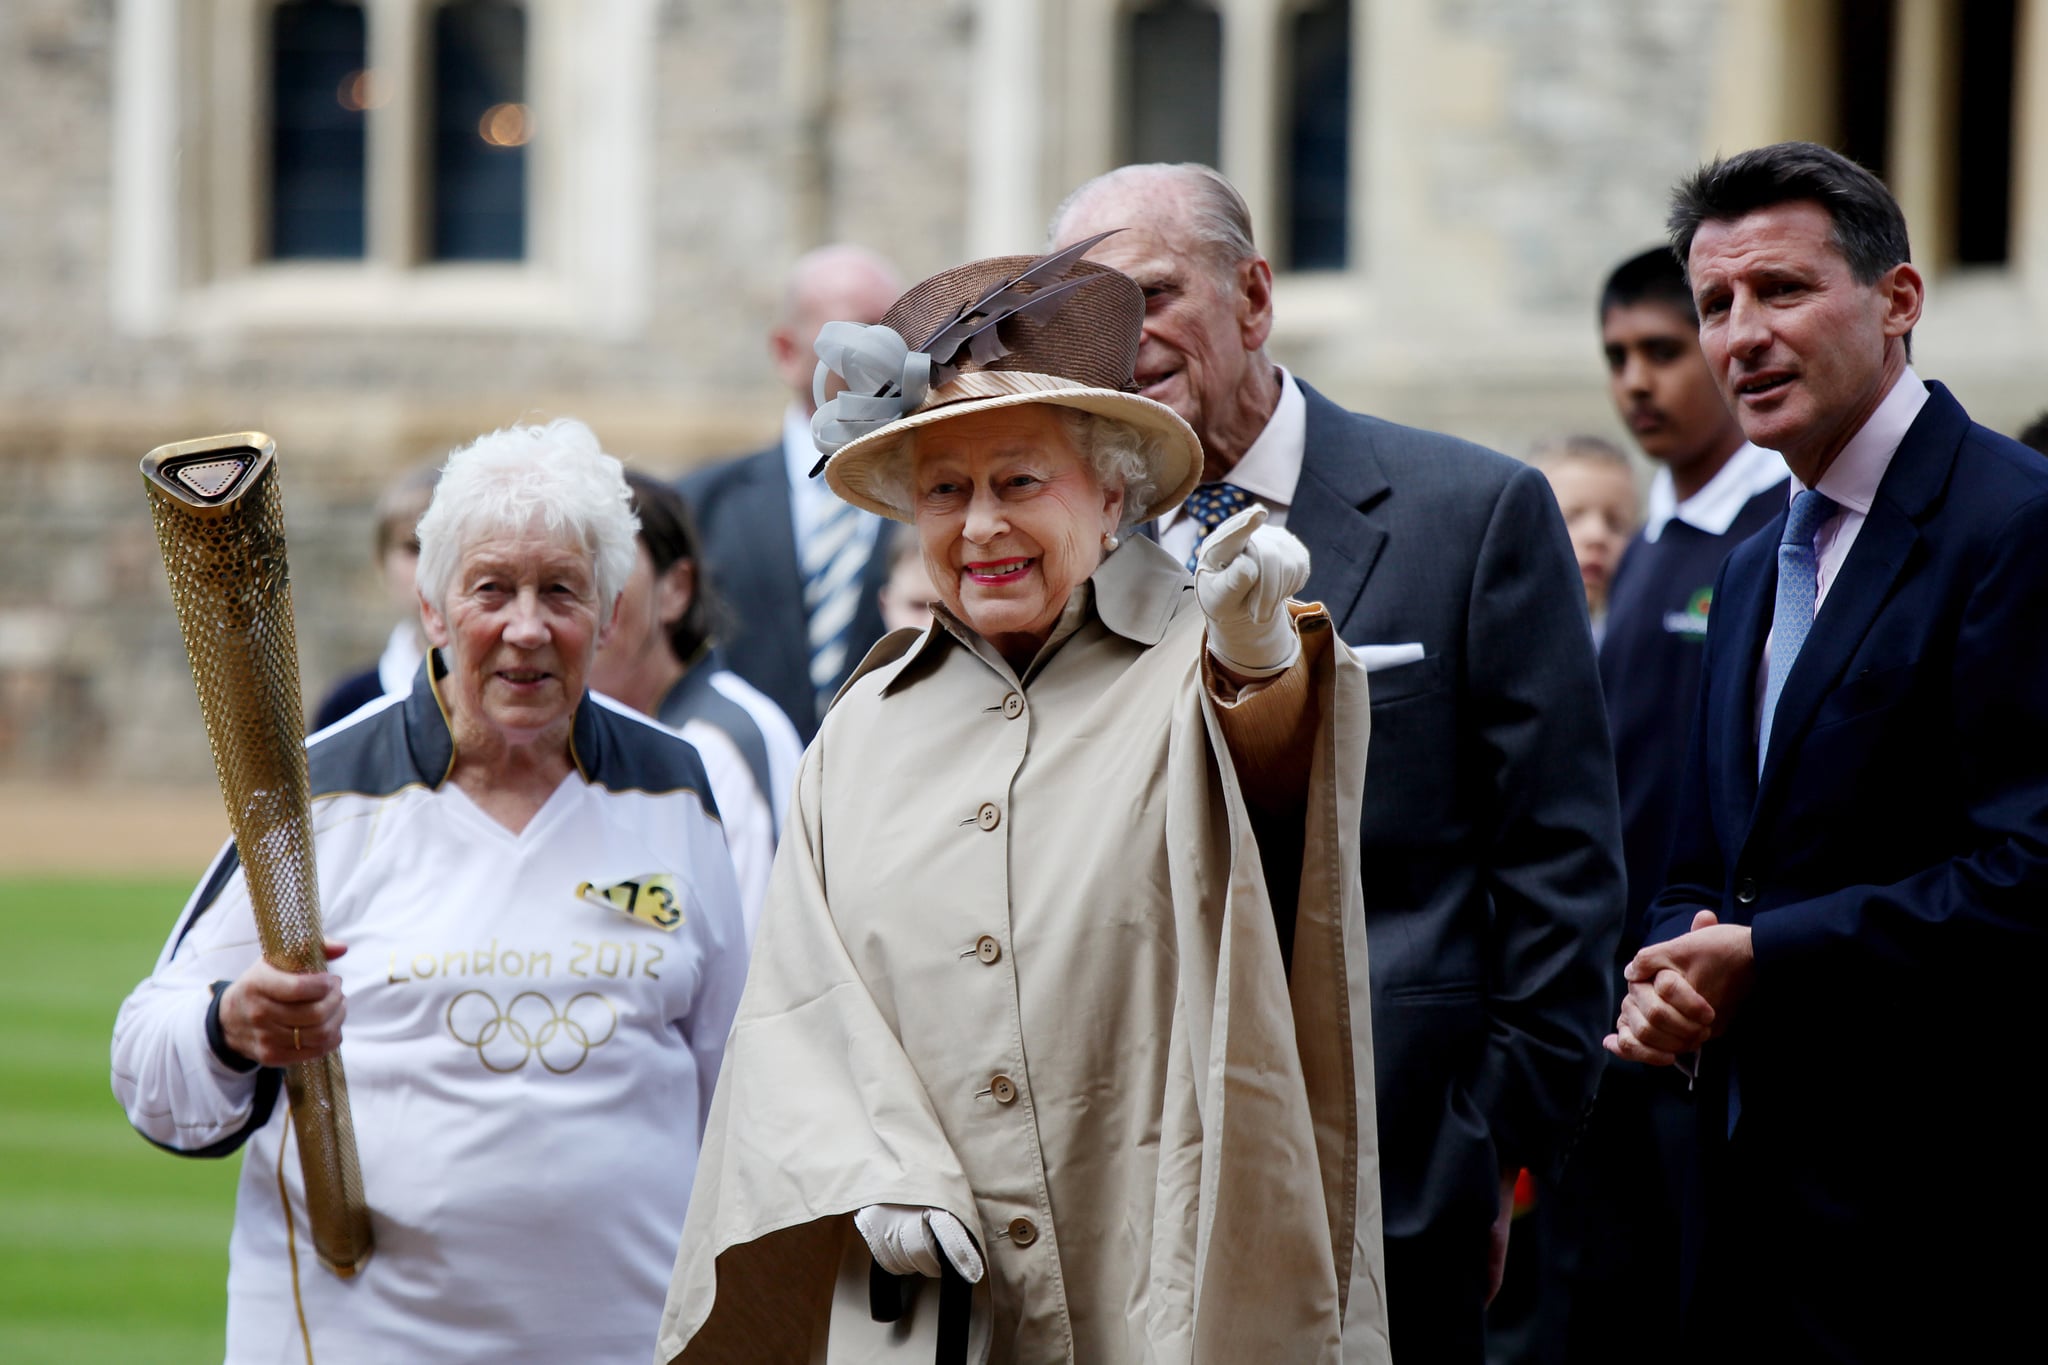 The Olympic torch visits Windsor Castle in 2012